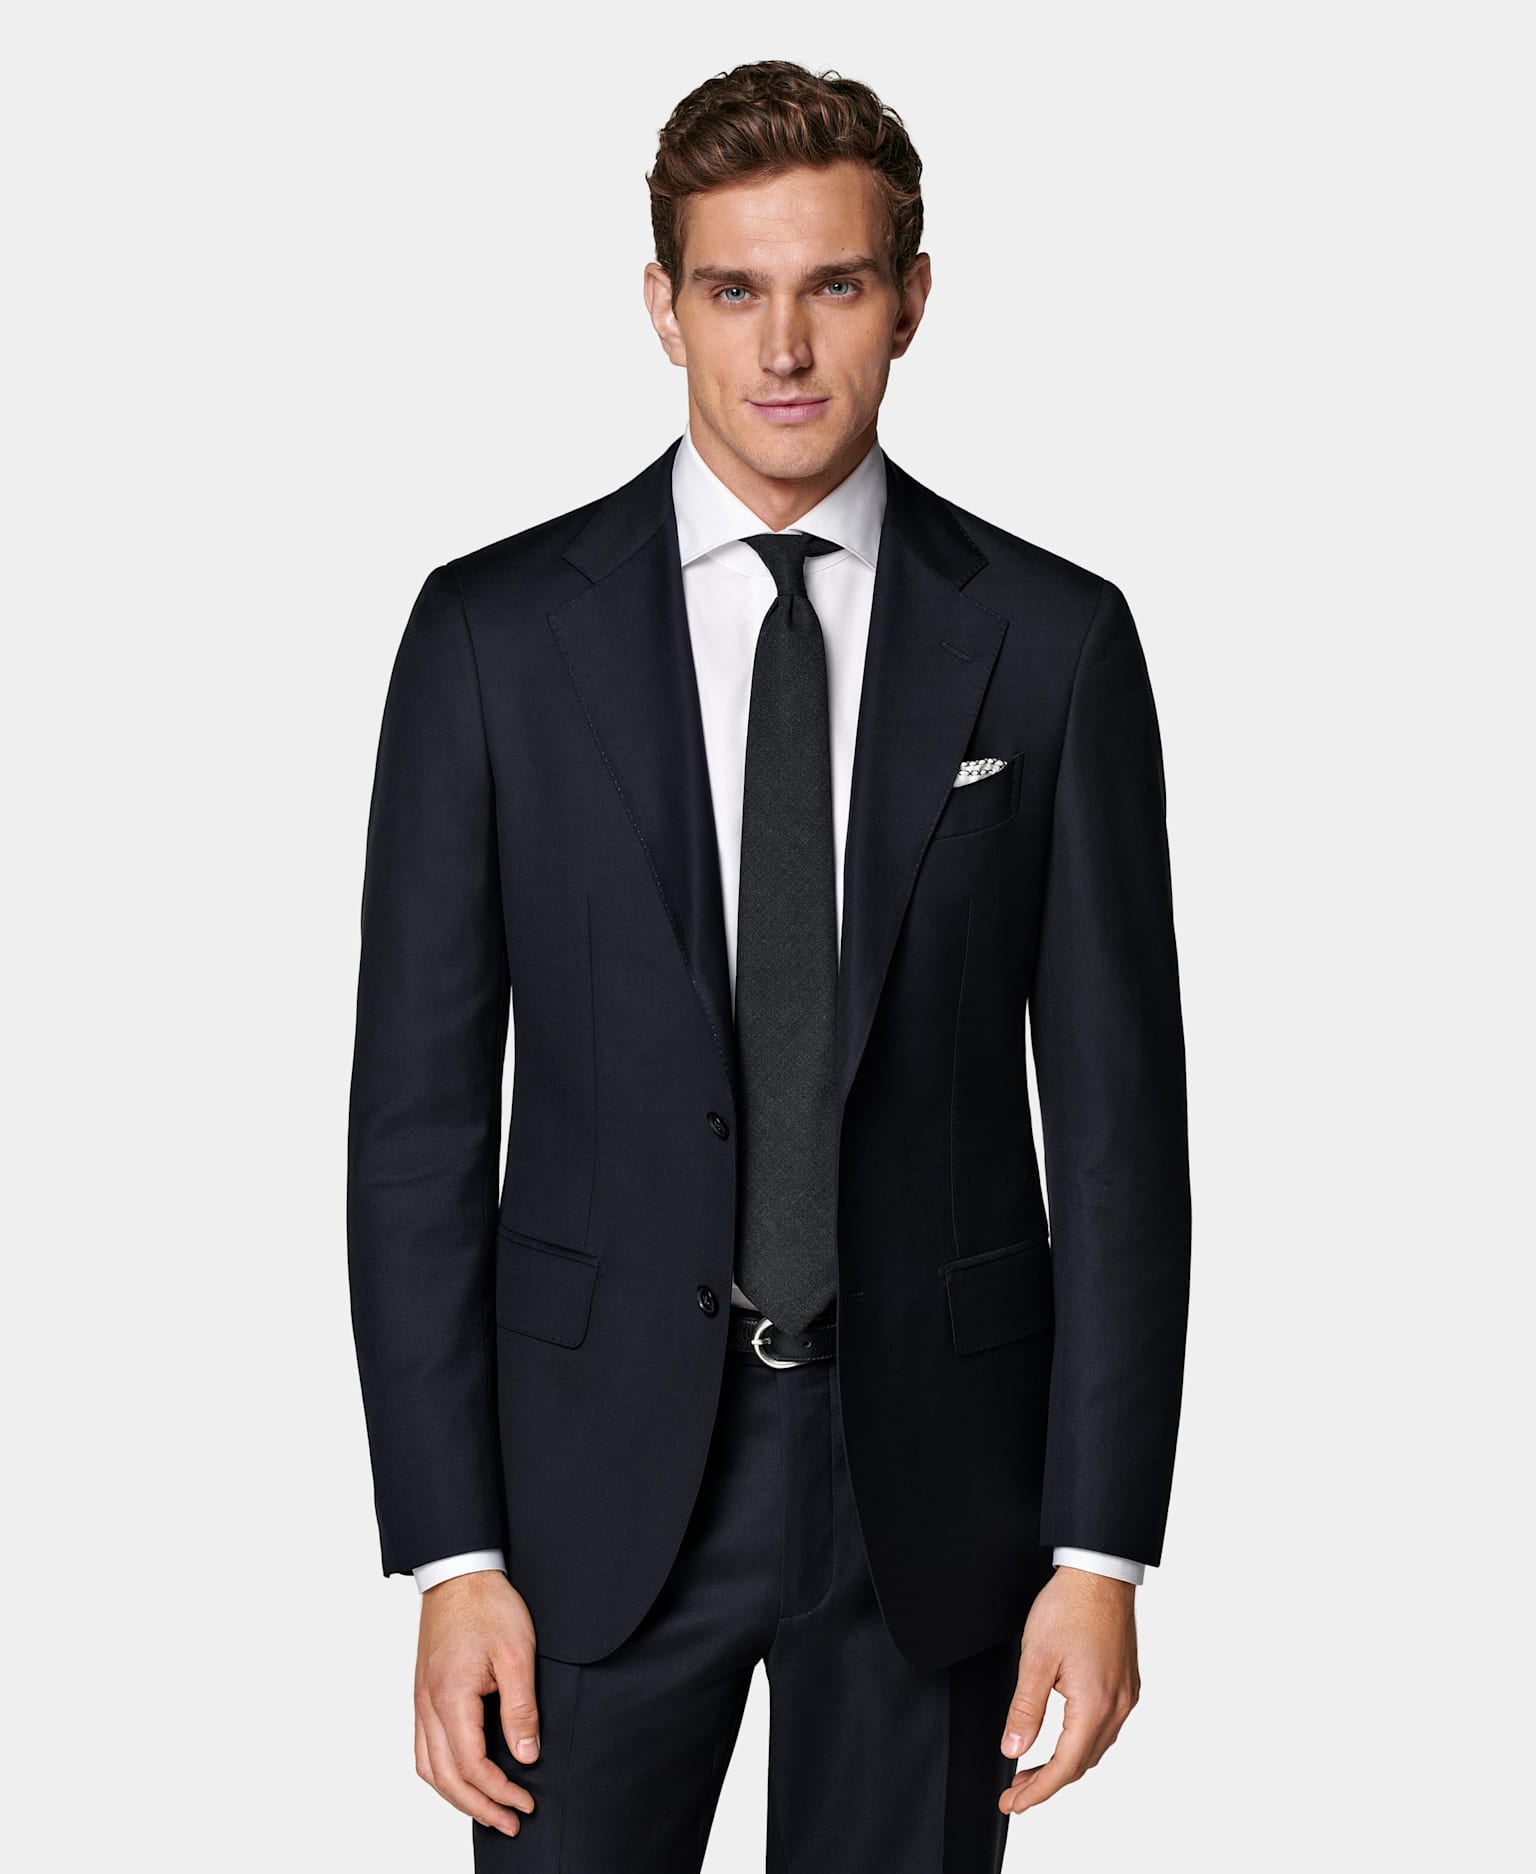 Navy single-breasted suit with shite shirt and navy tie.